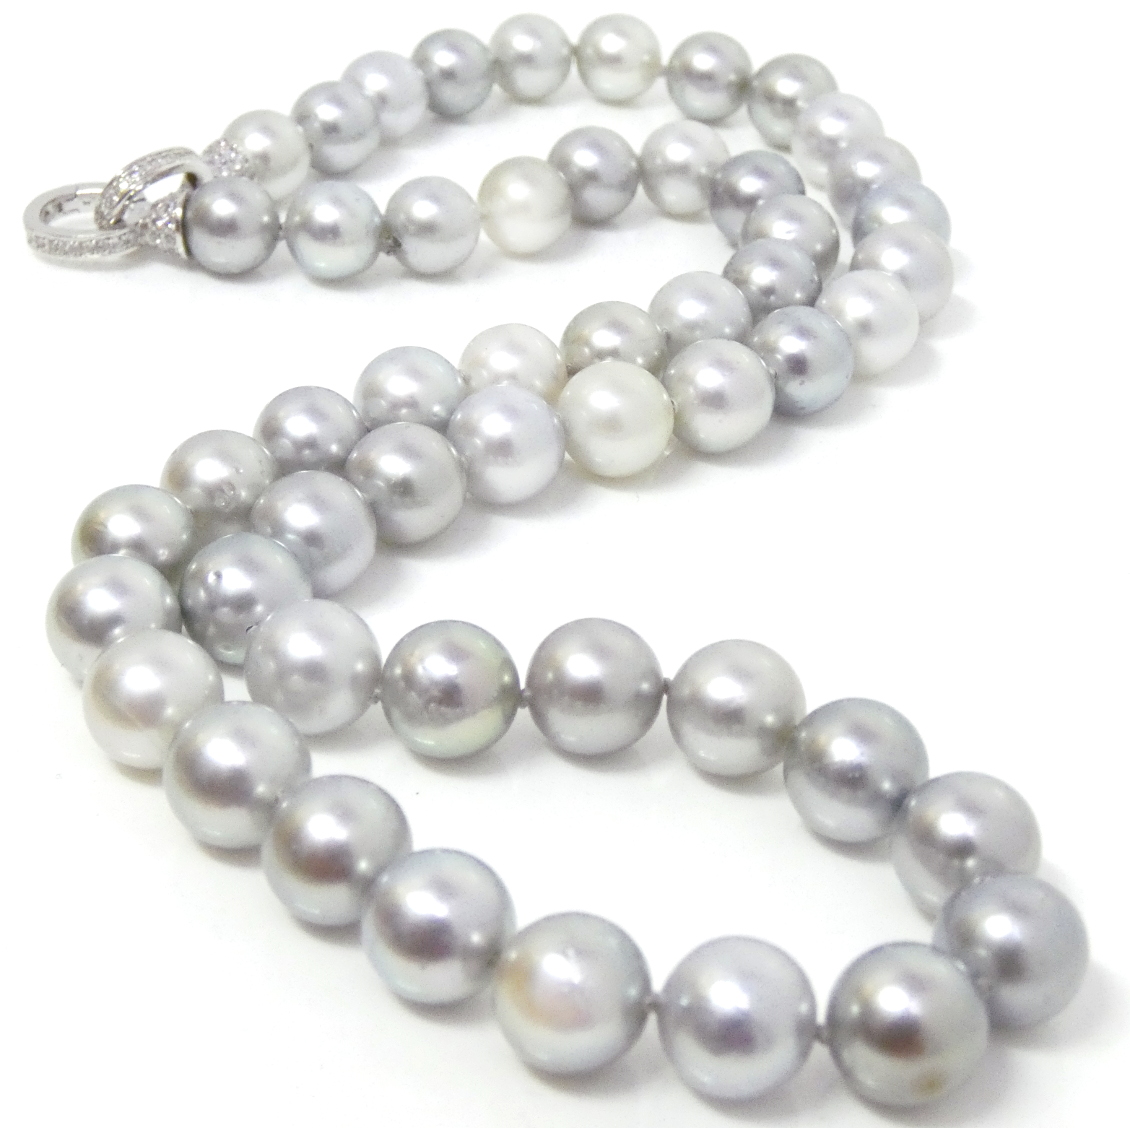 Silver and White Tahitian Pearls Necklace